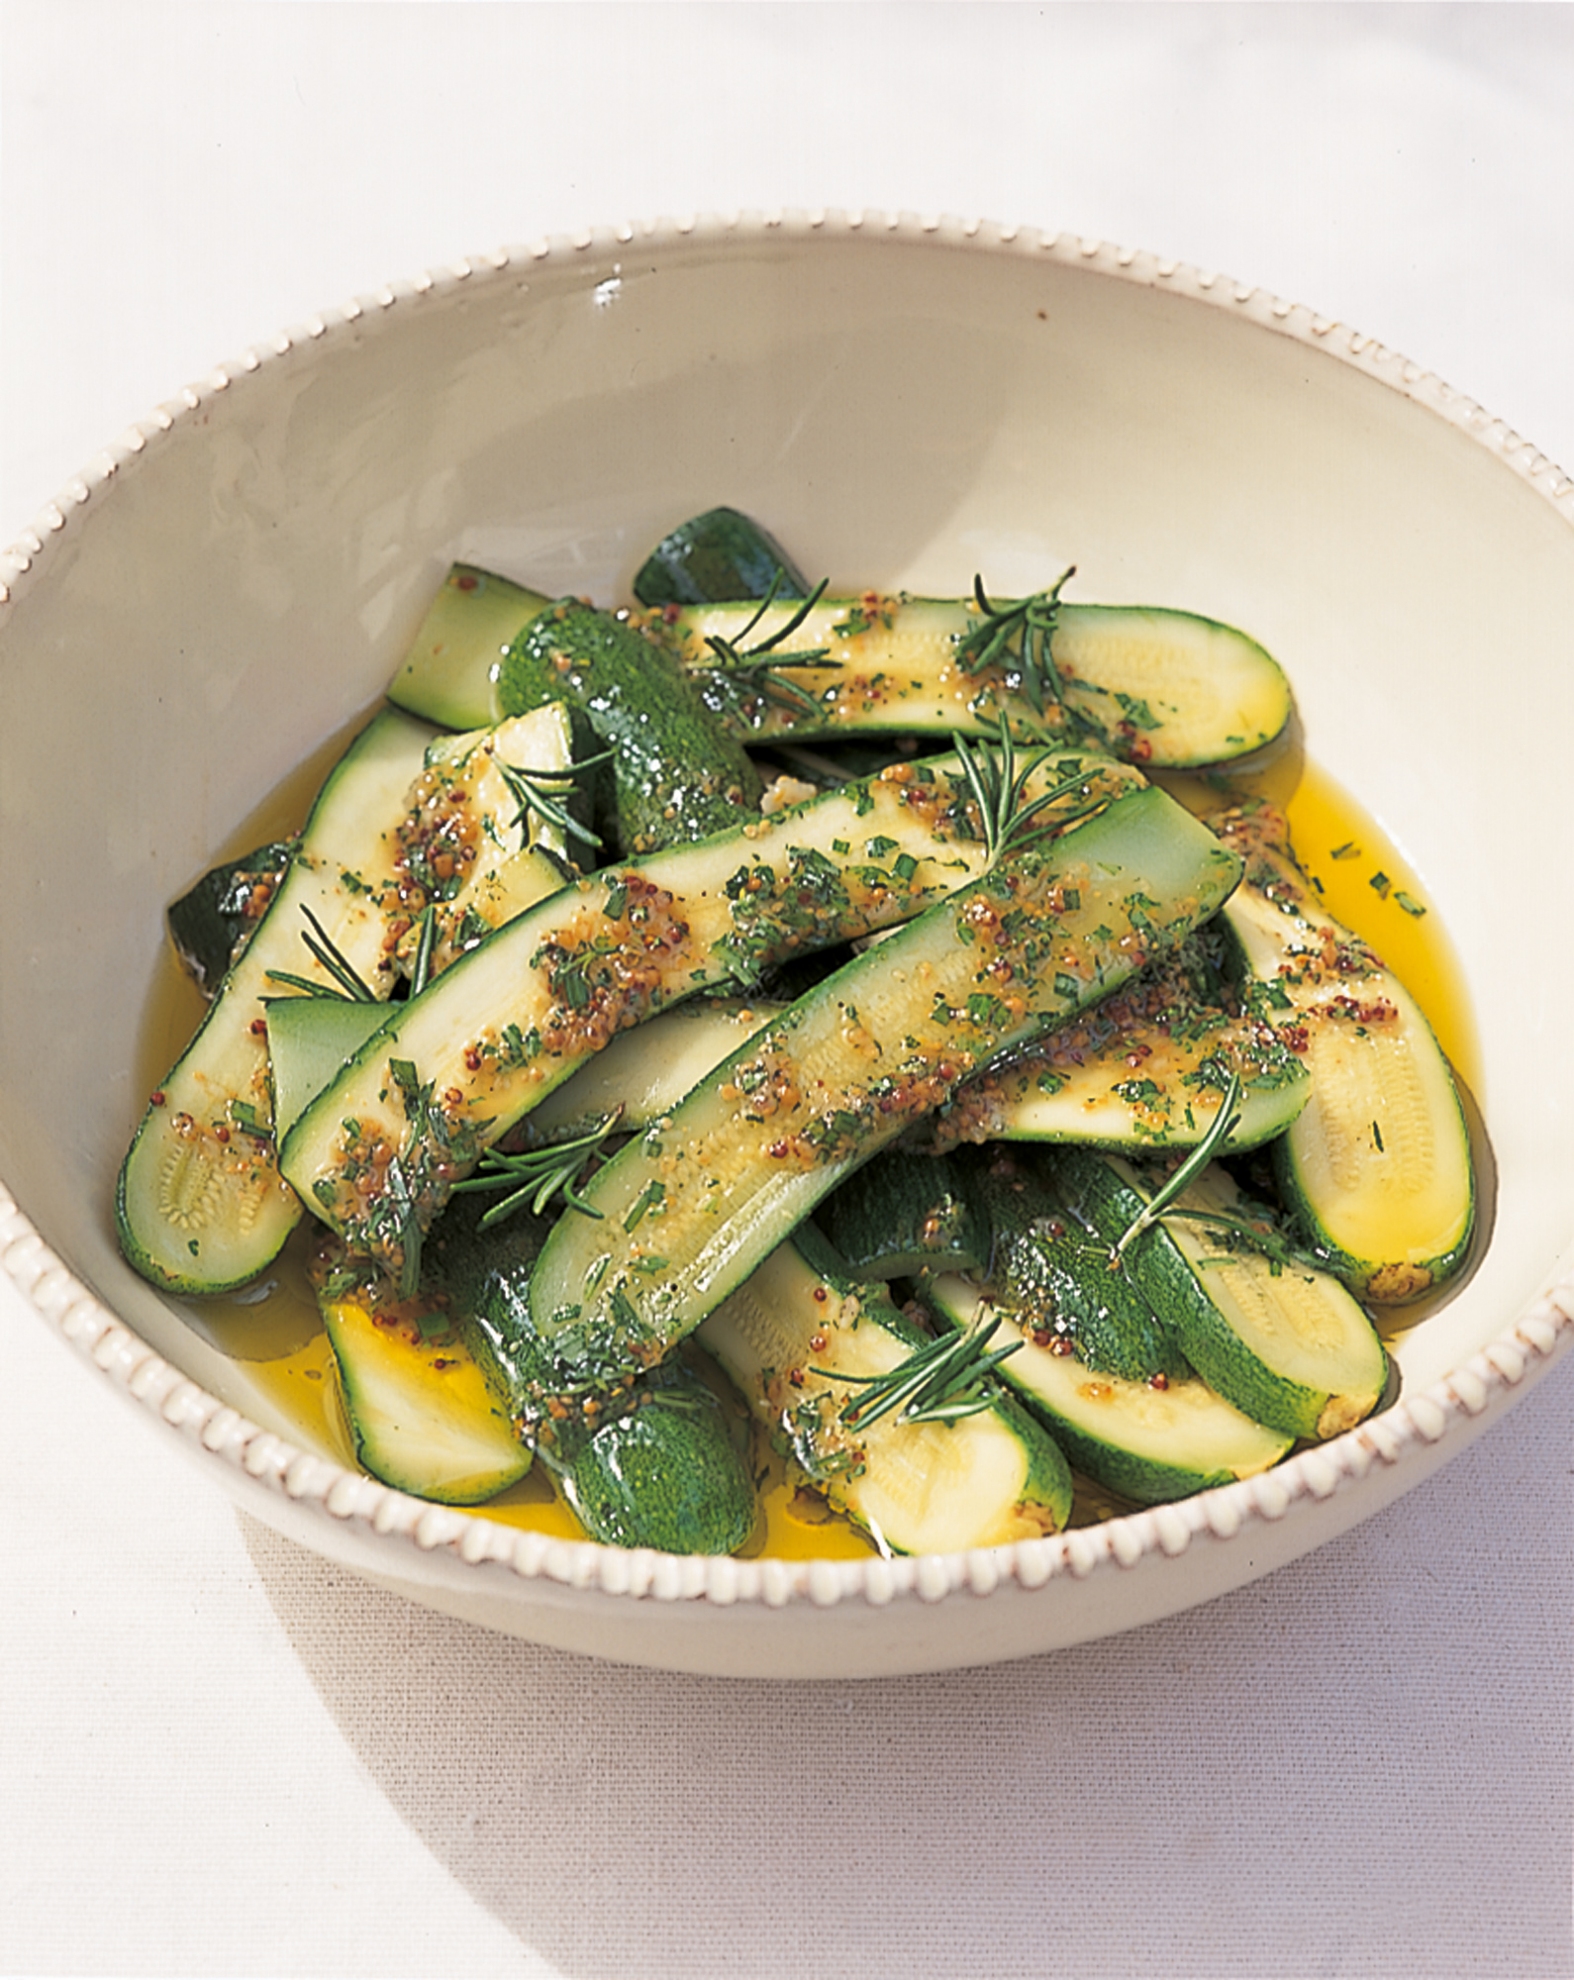 Marinated Courgettes with a Herb Vinaigrette | Recipes | Delia Online